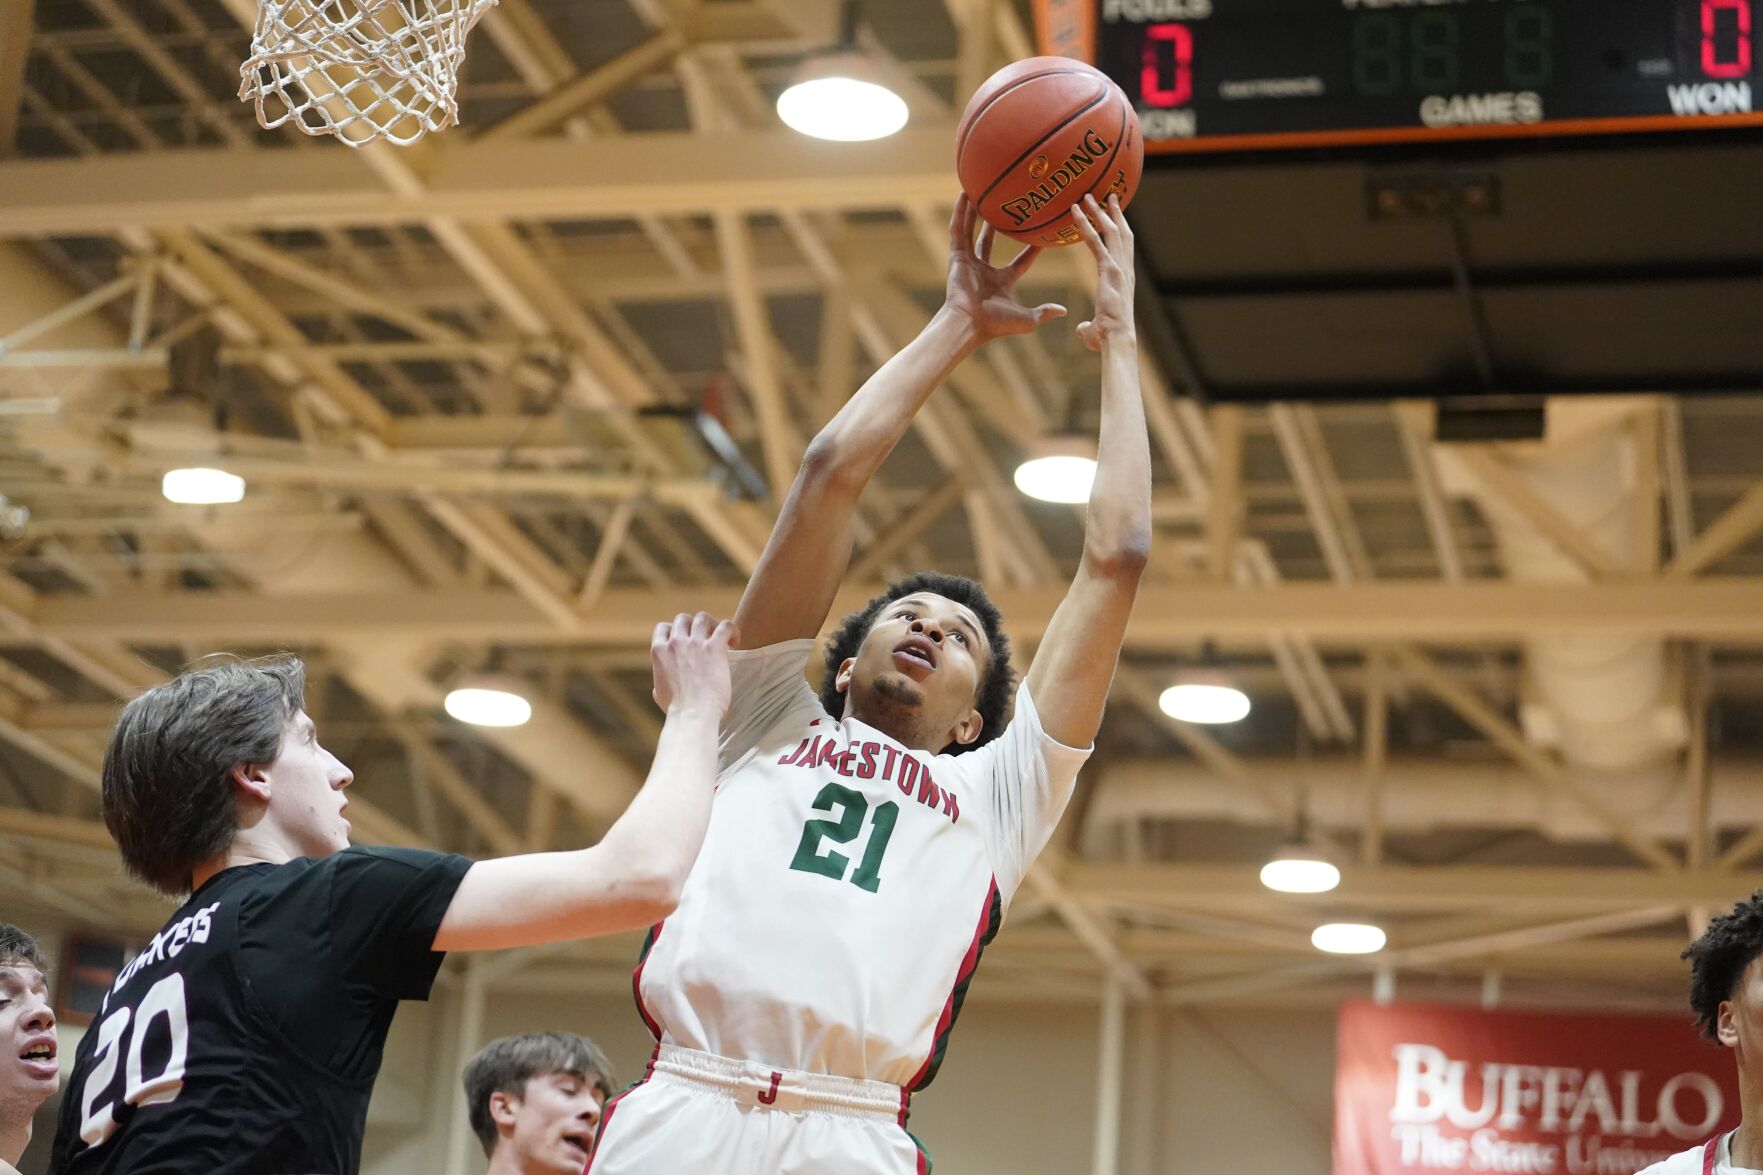 High School Basketball Semifinals Recap: Jamestown, Health Sciences, and Williamsville East Advance to Championship Games